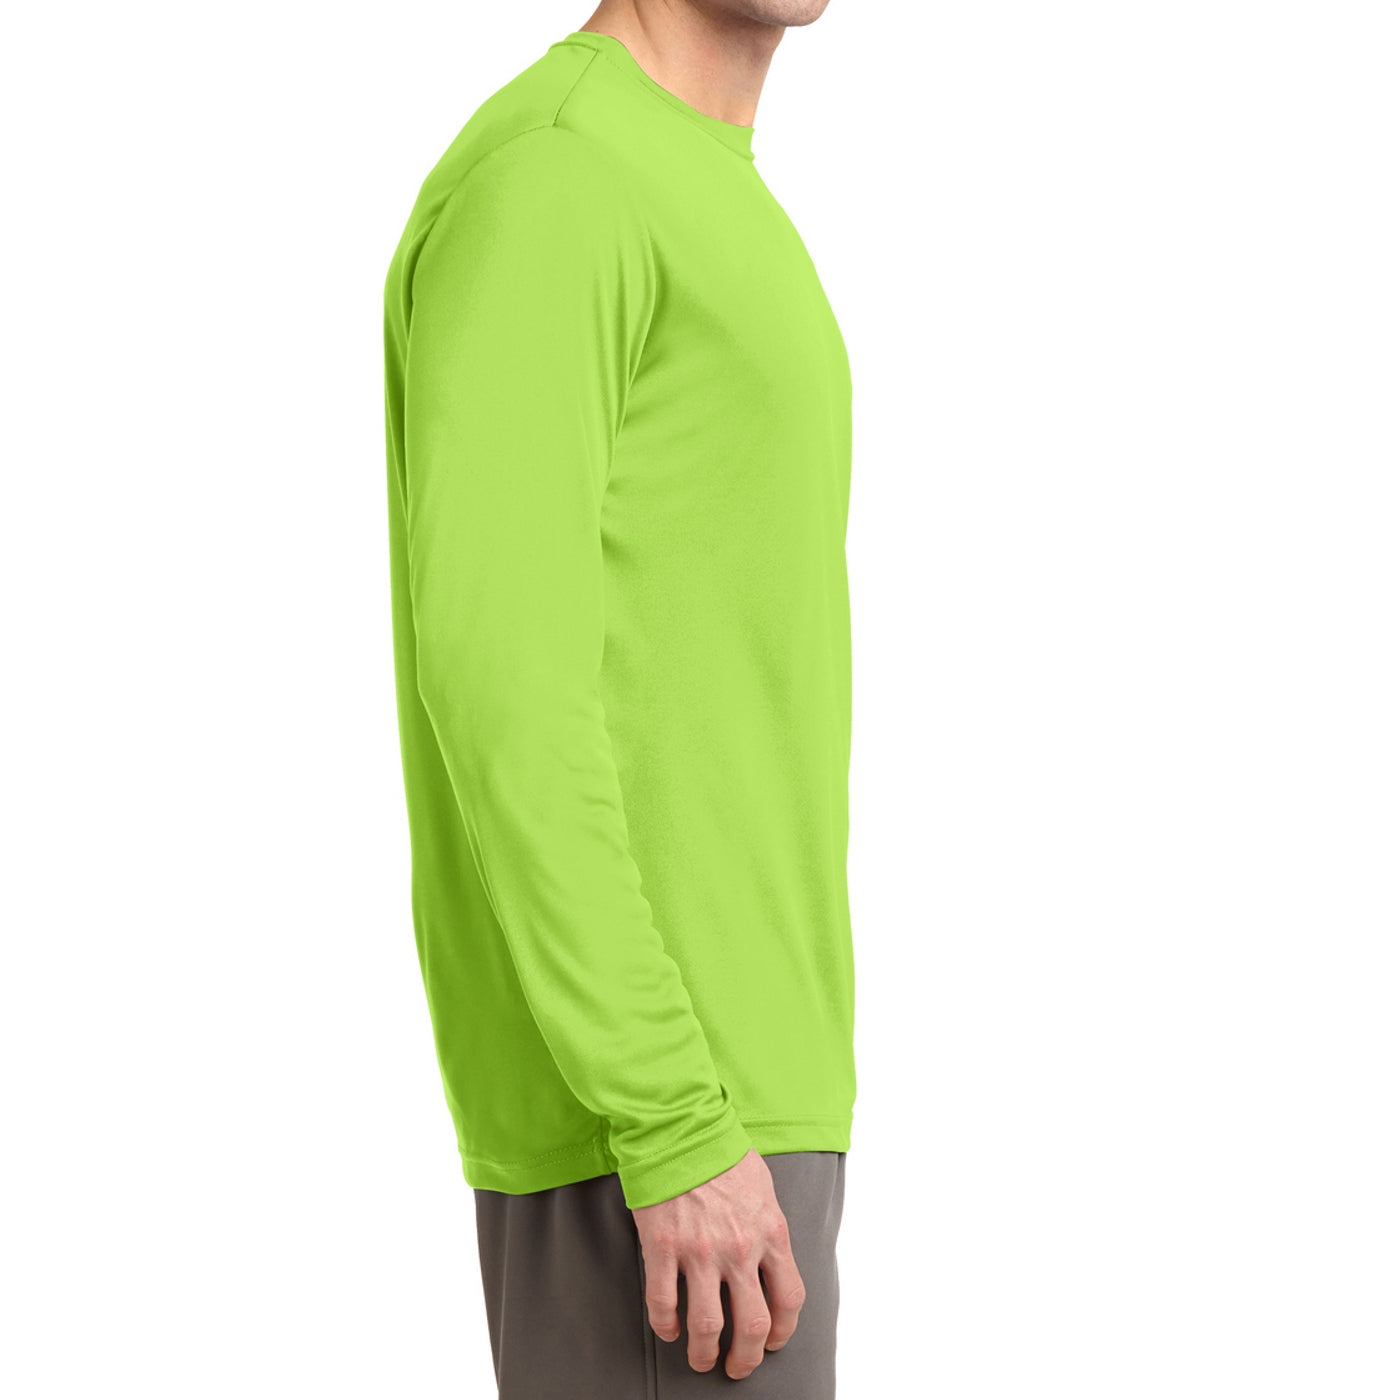 Men's Long Sleeve PosiCharge Competitor Tee - Lime Shock